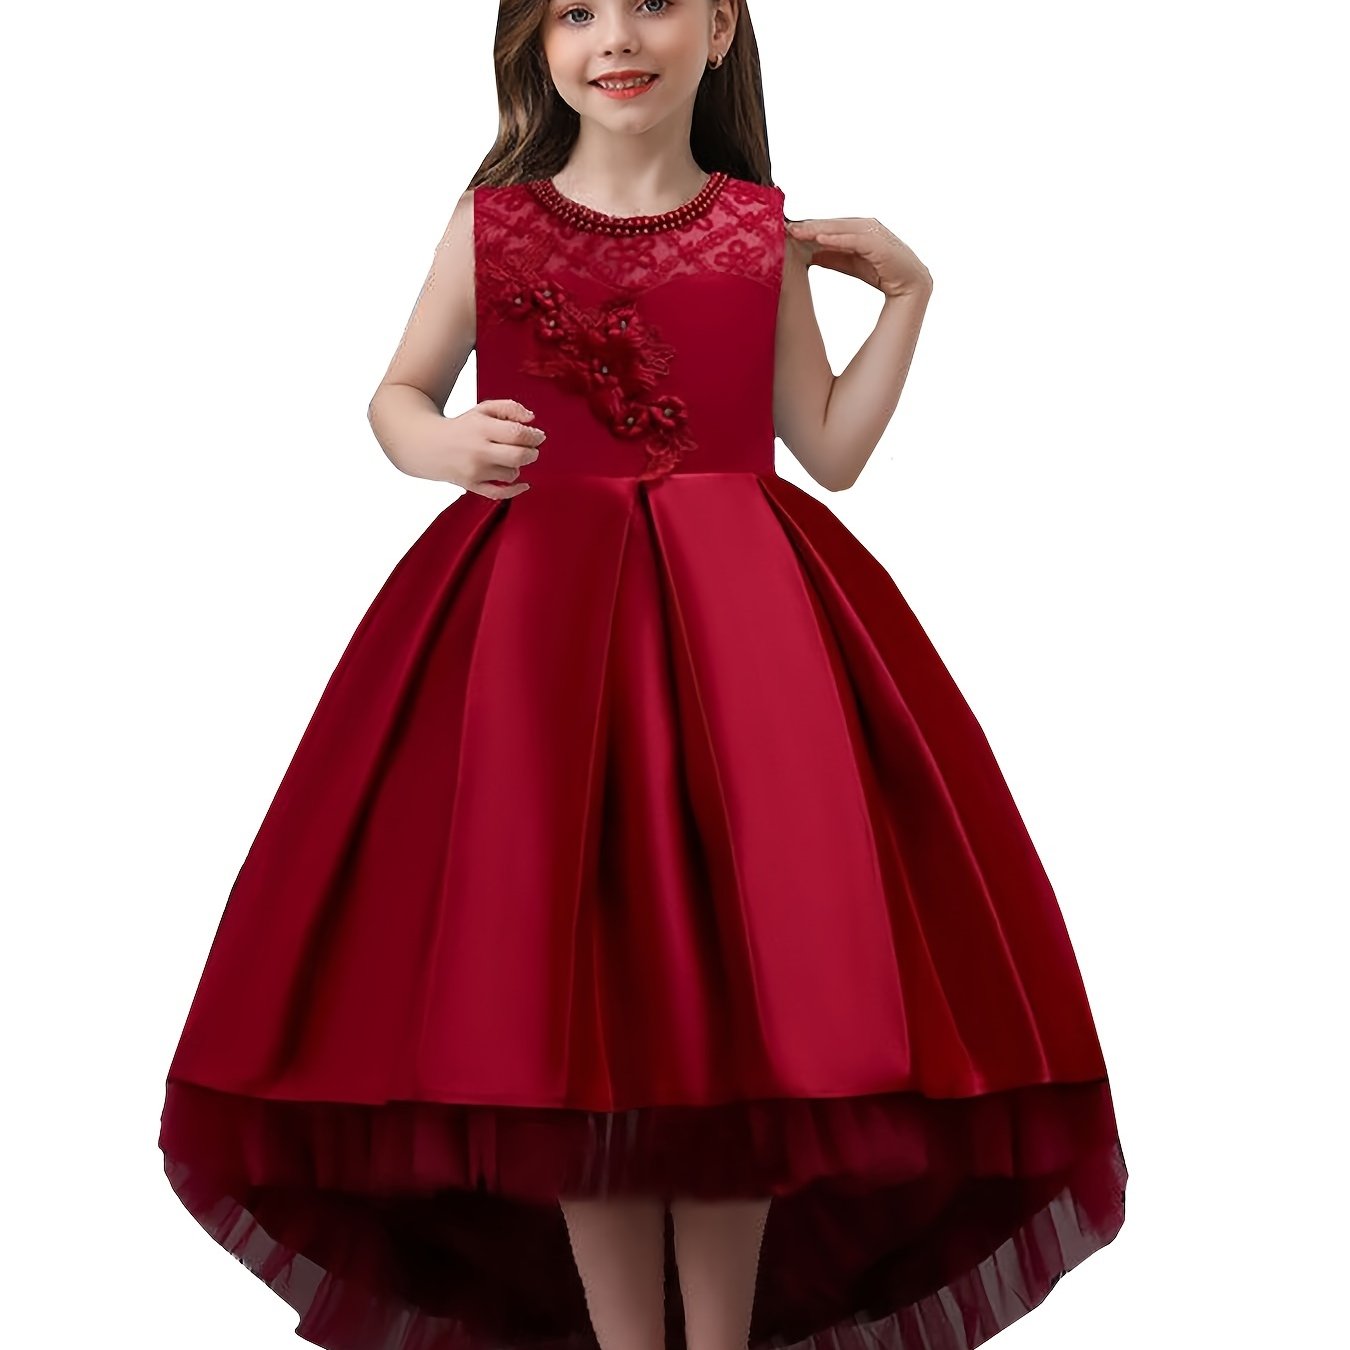 Cute Elegant Stitching Mesh Princess Dress with Flower Embroidery